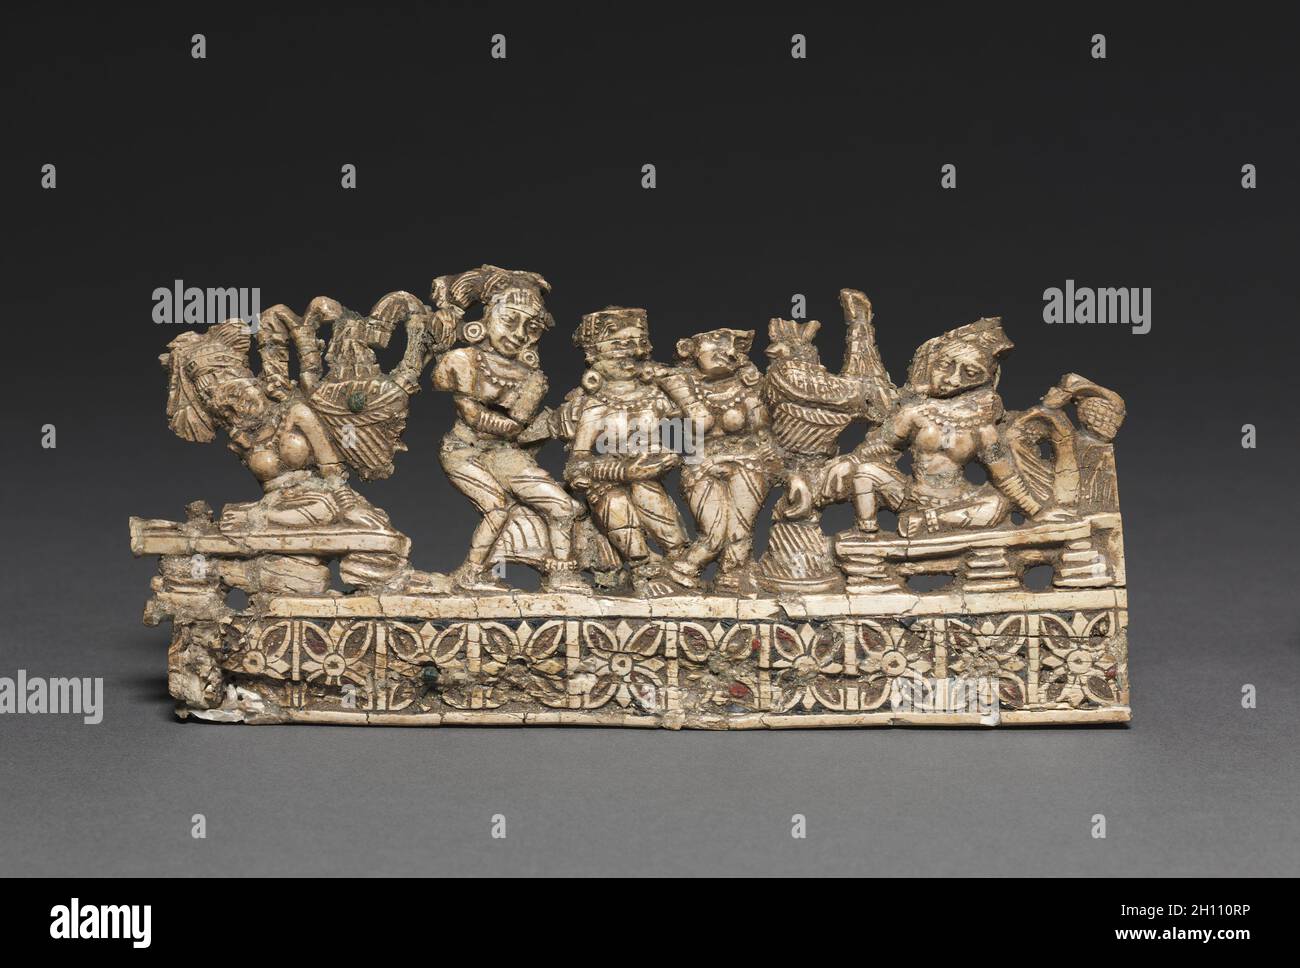 Ladies Entertained by Dancers, AD 1–200. Afghanistan, Begram, Kushan period (AD 1–320). Ivory; overall: 7.5 x 17 cm (2 15/16 x 6 11/16 in.). Stock Photo